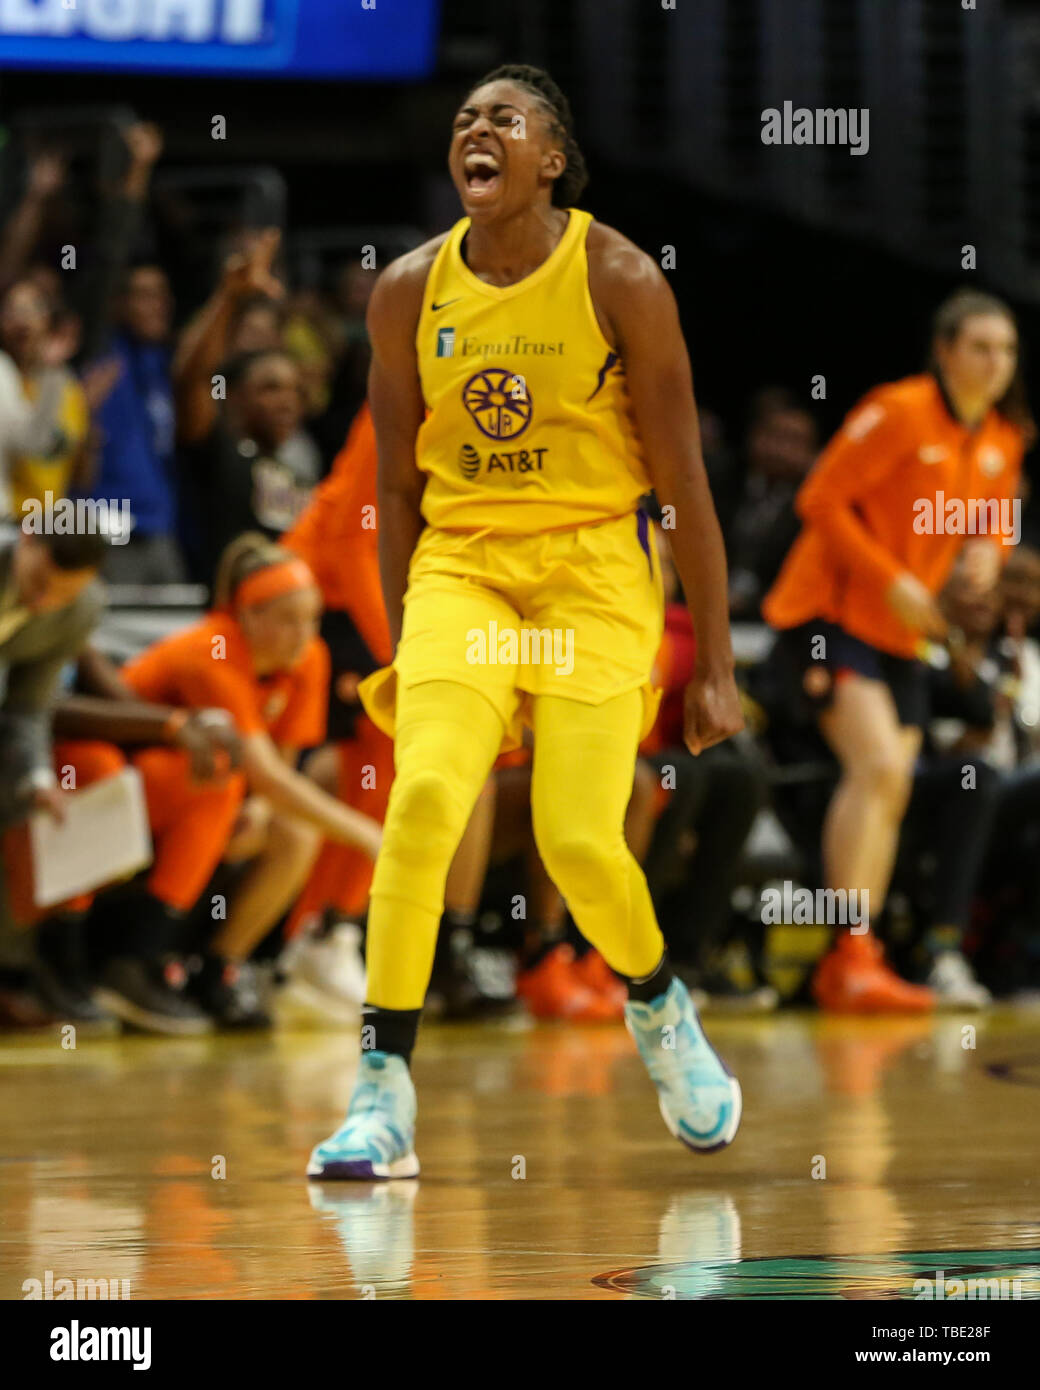 Los Angeles Sparks forward Nneka Ogwumike #30 yells during the Connecticut Sun vs Los Angeles Sparks game at Staples Center in Los Angeles, Ca on May 31, 2019. (Photo by Jevone Moore) Stock Photo